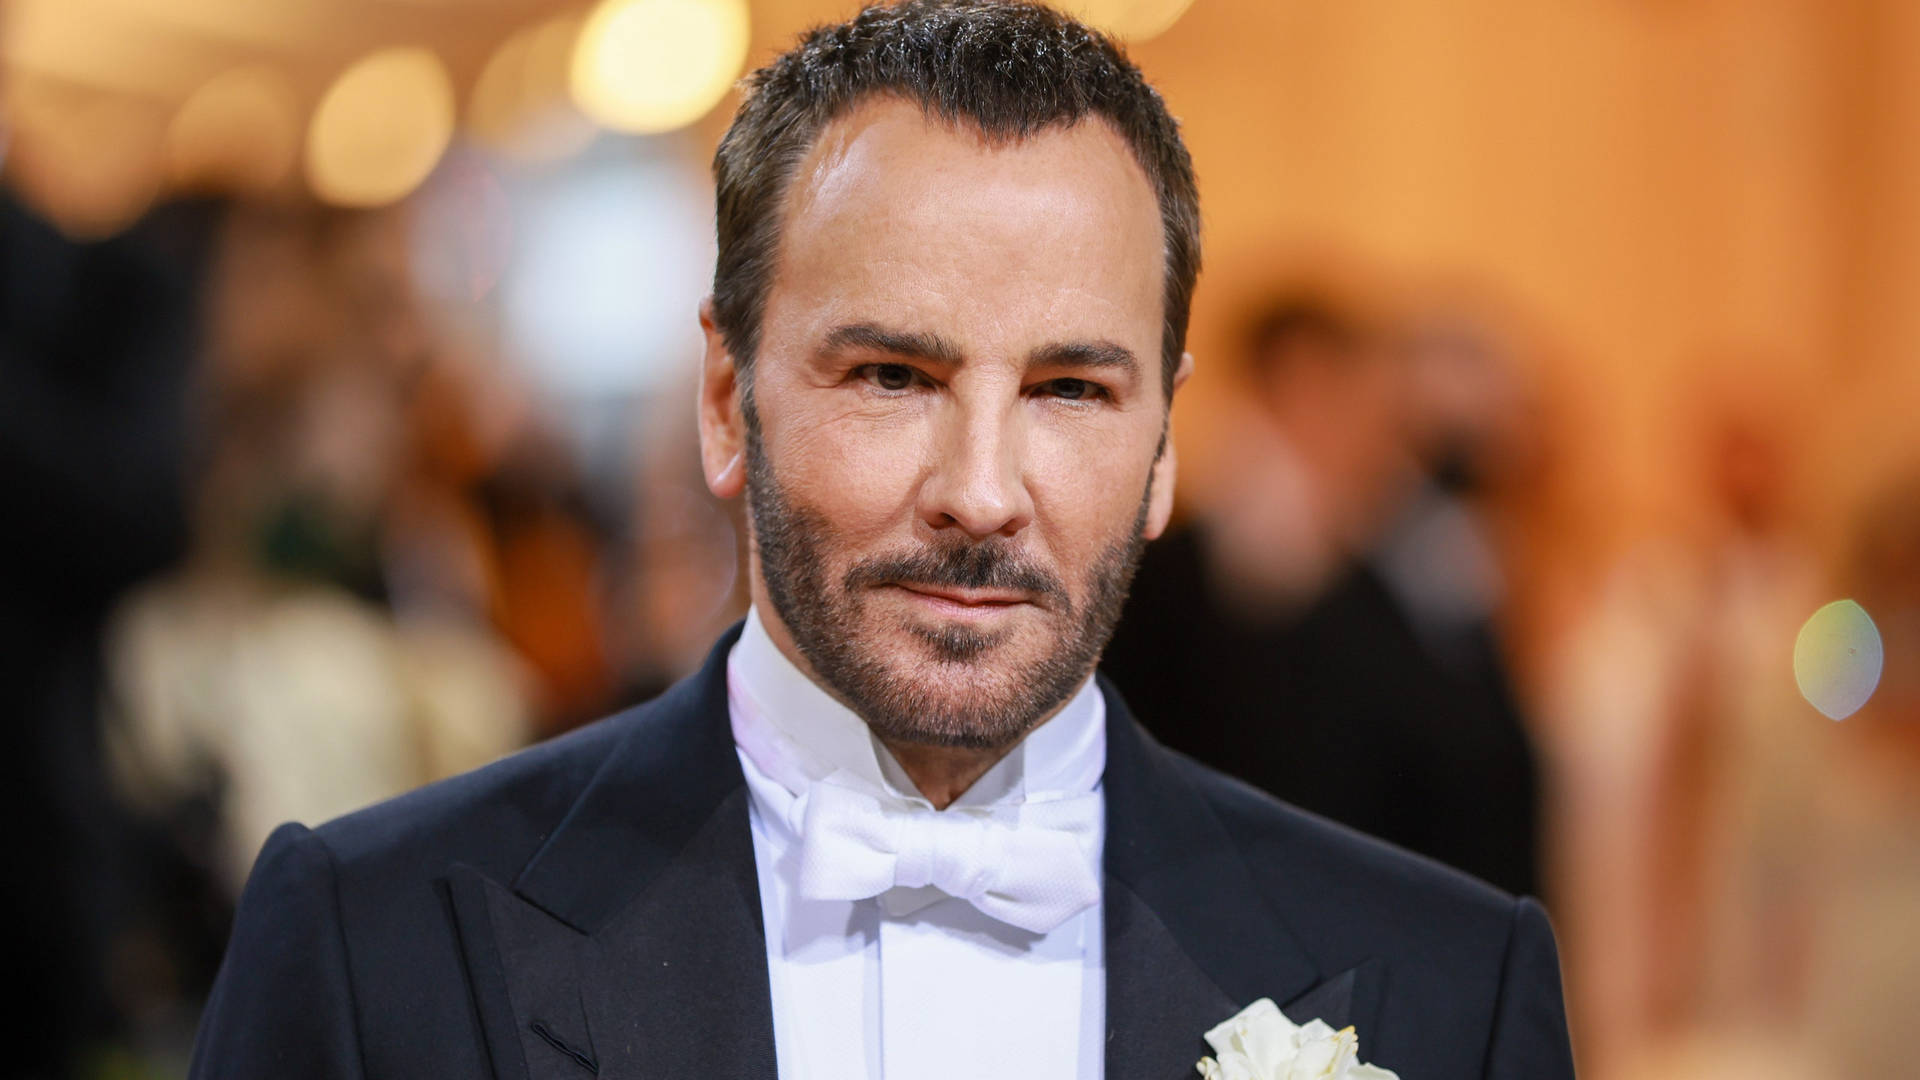 Tom Ford With White Bowtie Picture